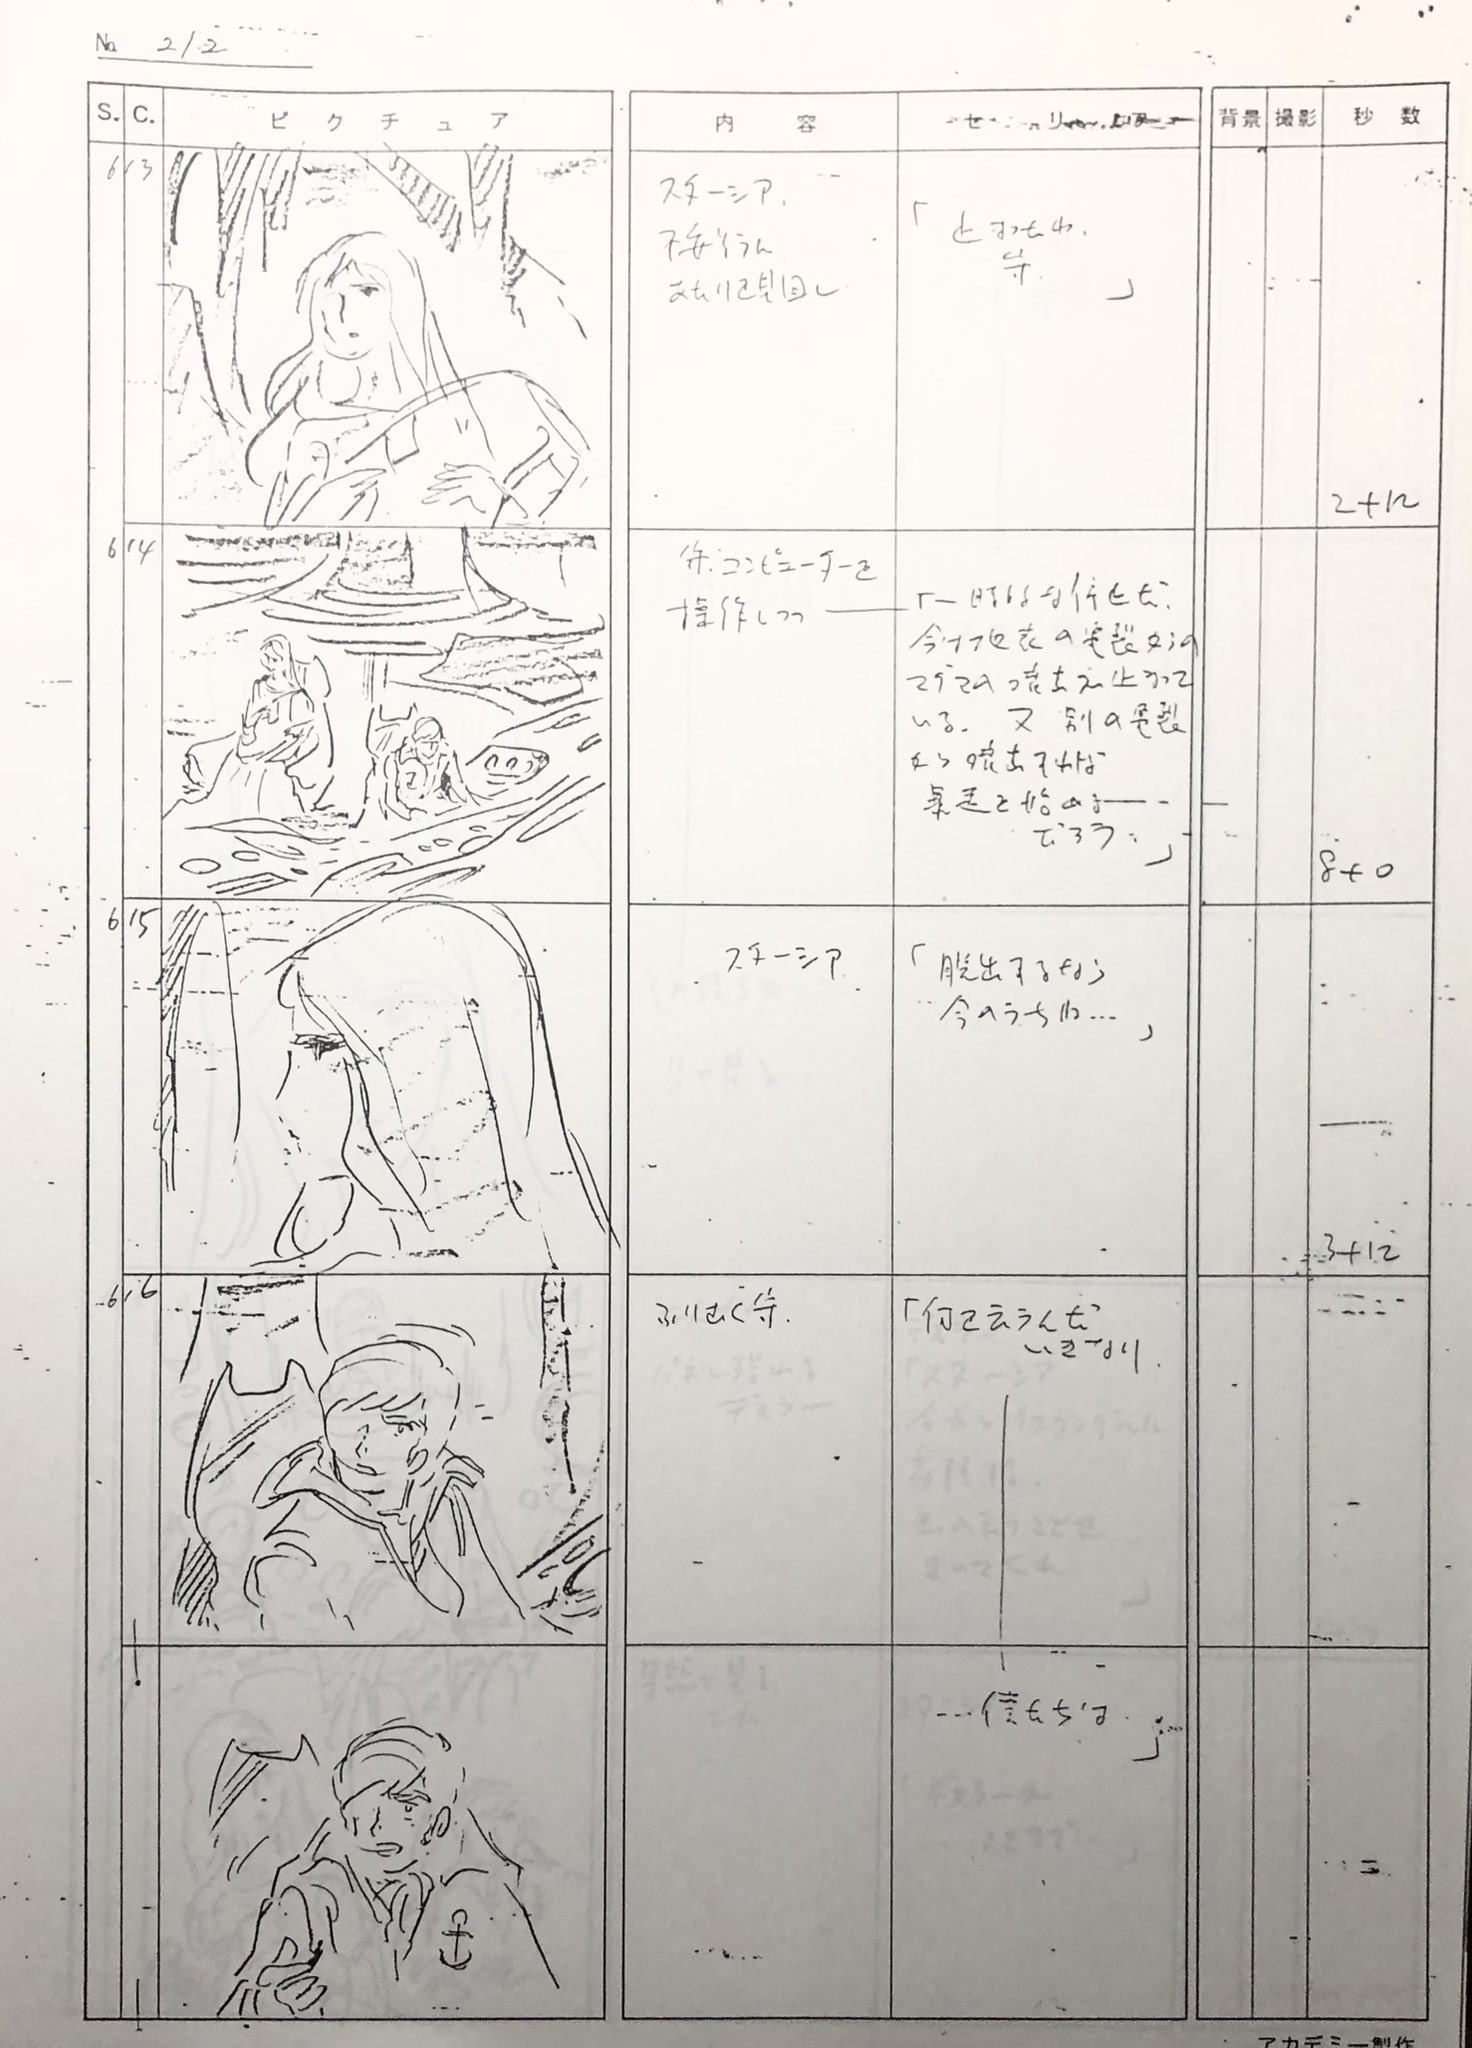 Case Closed; storyboard